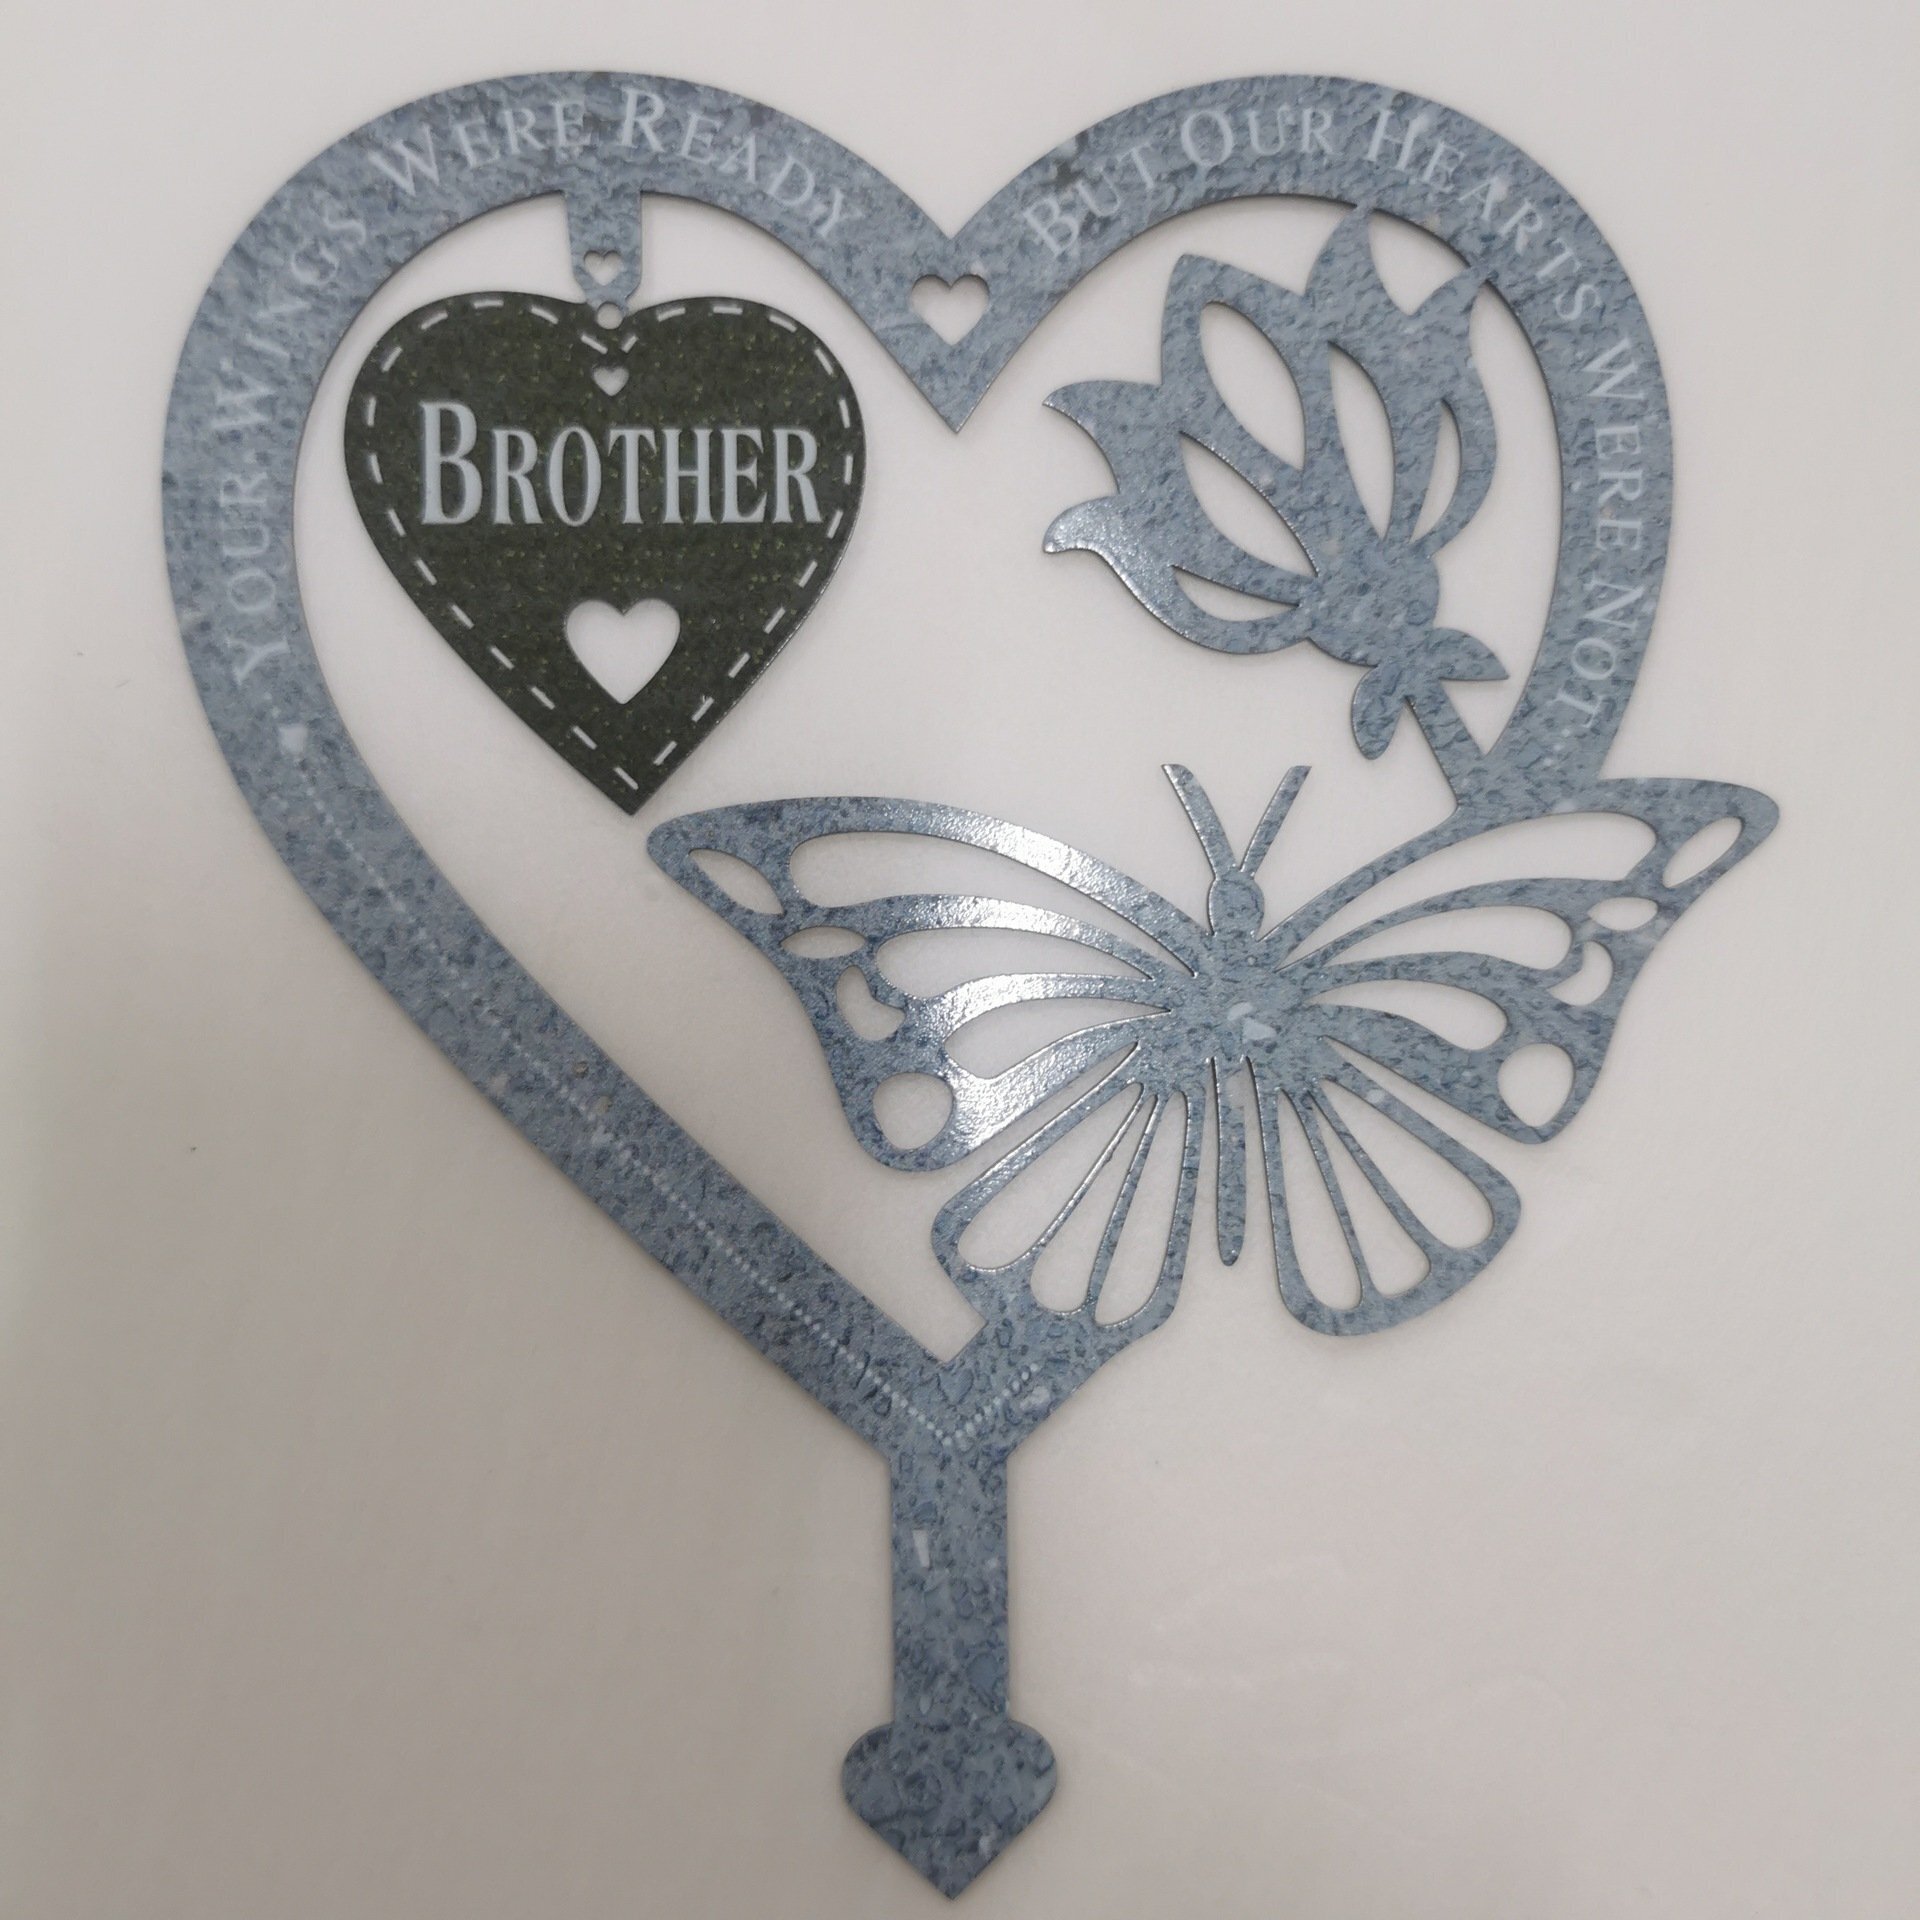 🔥Last Day Promotion - 50% OFF🔥 - Memorial Gift Butterfly Ornament-Garden Memorial Plaque ( 🔥BUY 2 GET FREE SHIPPING )